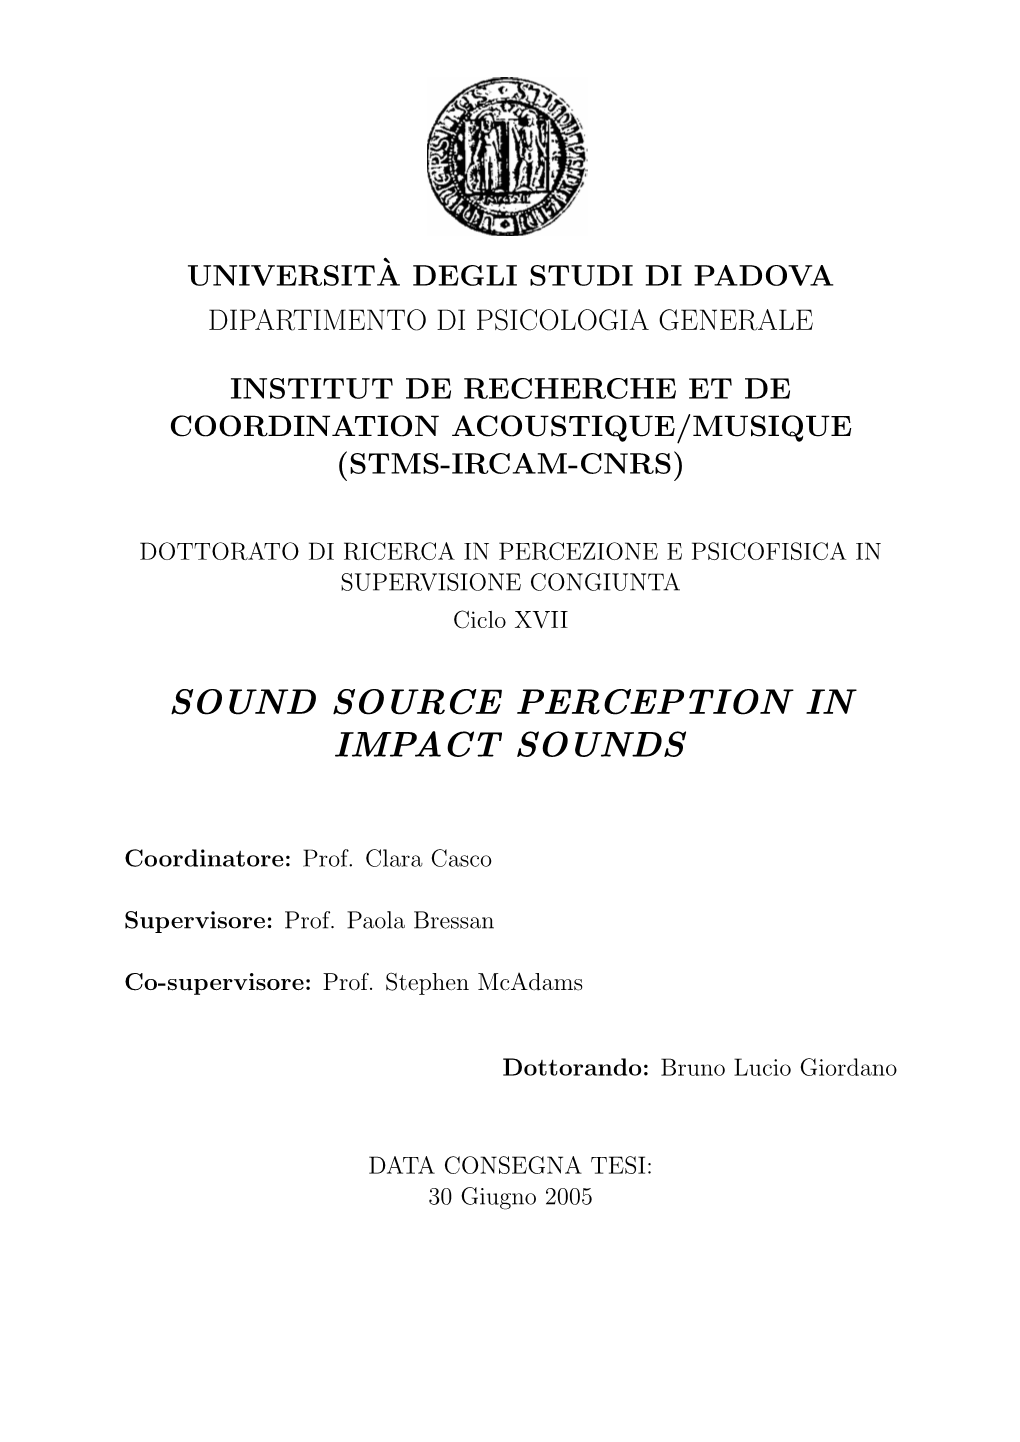 Sound Source Perception in Impact Sounds